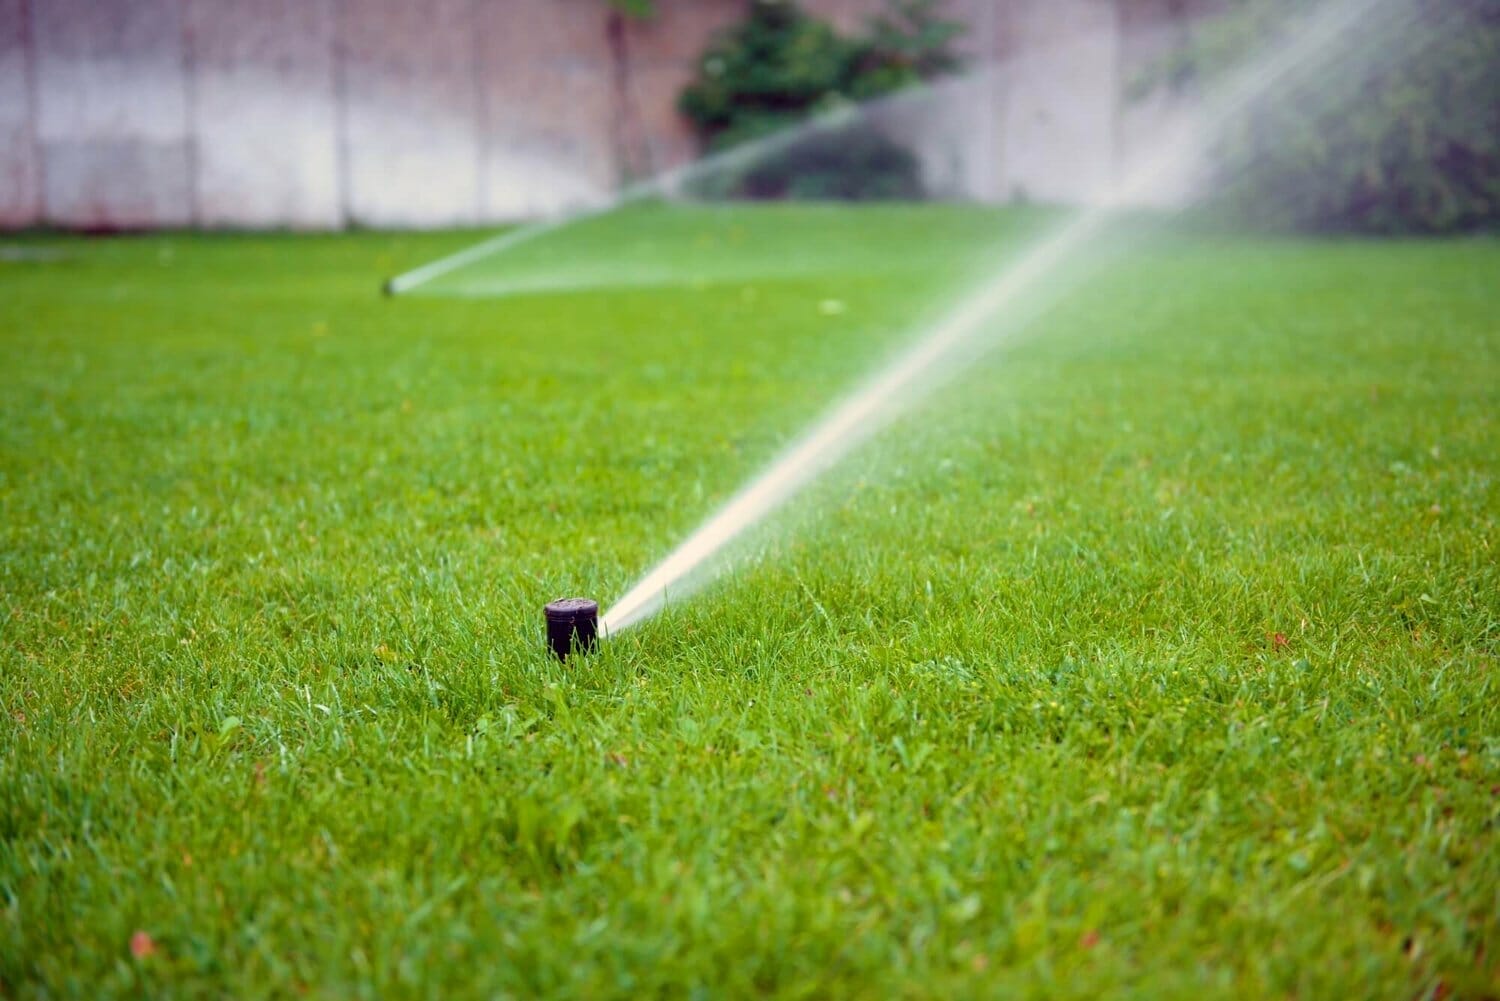  How long does it take for sprinklers to provide an inch of water waterev